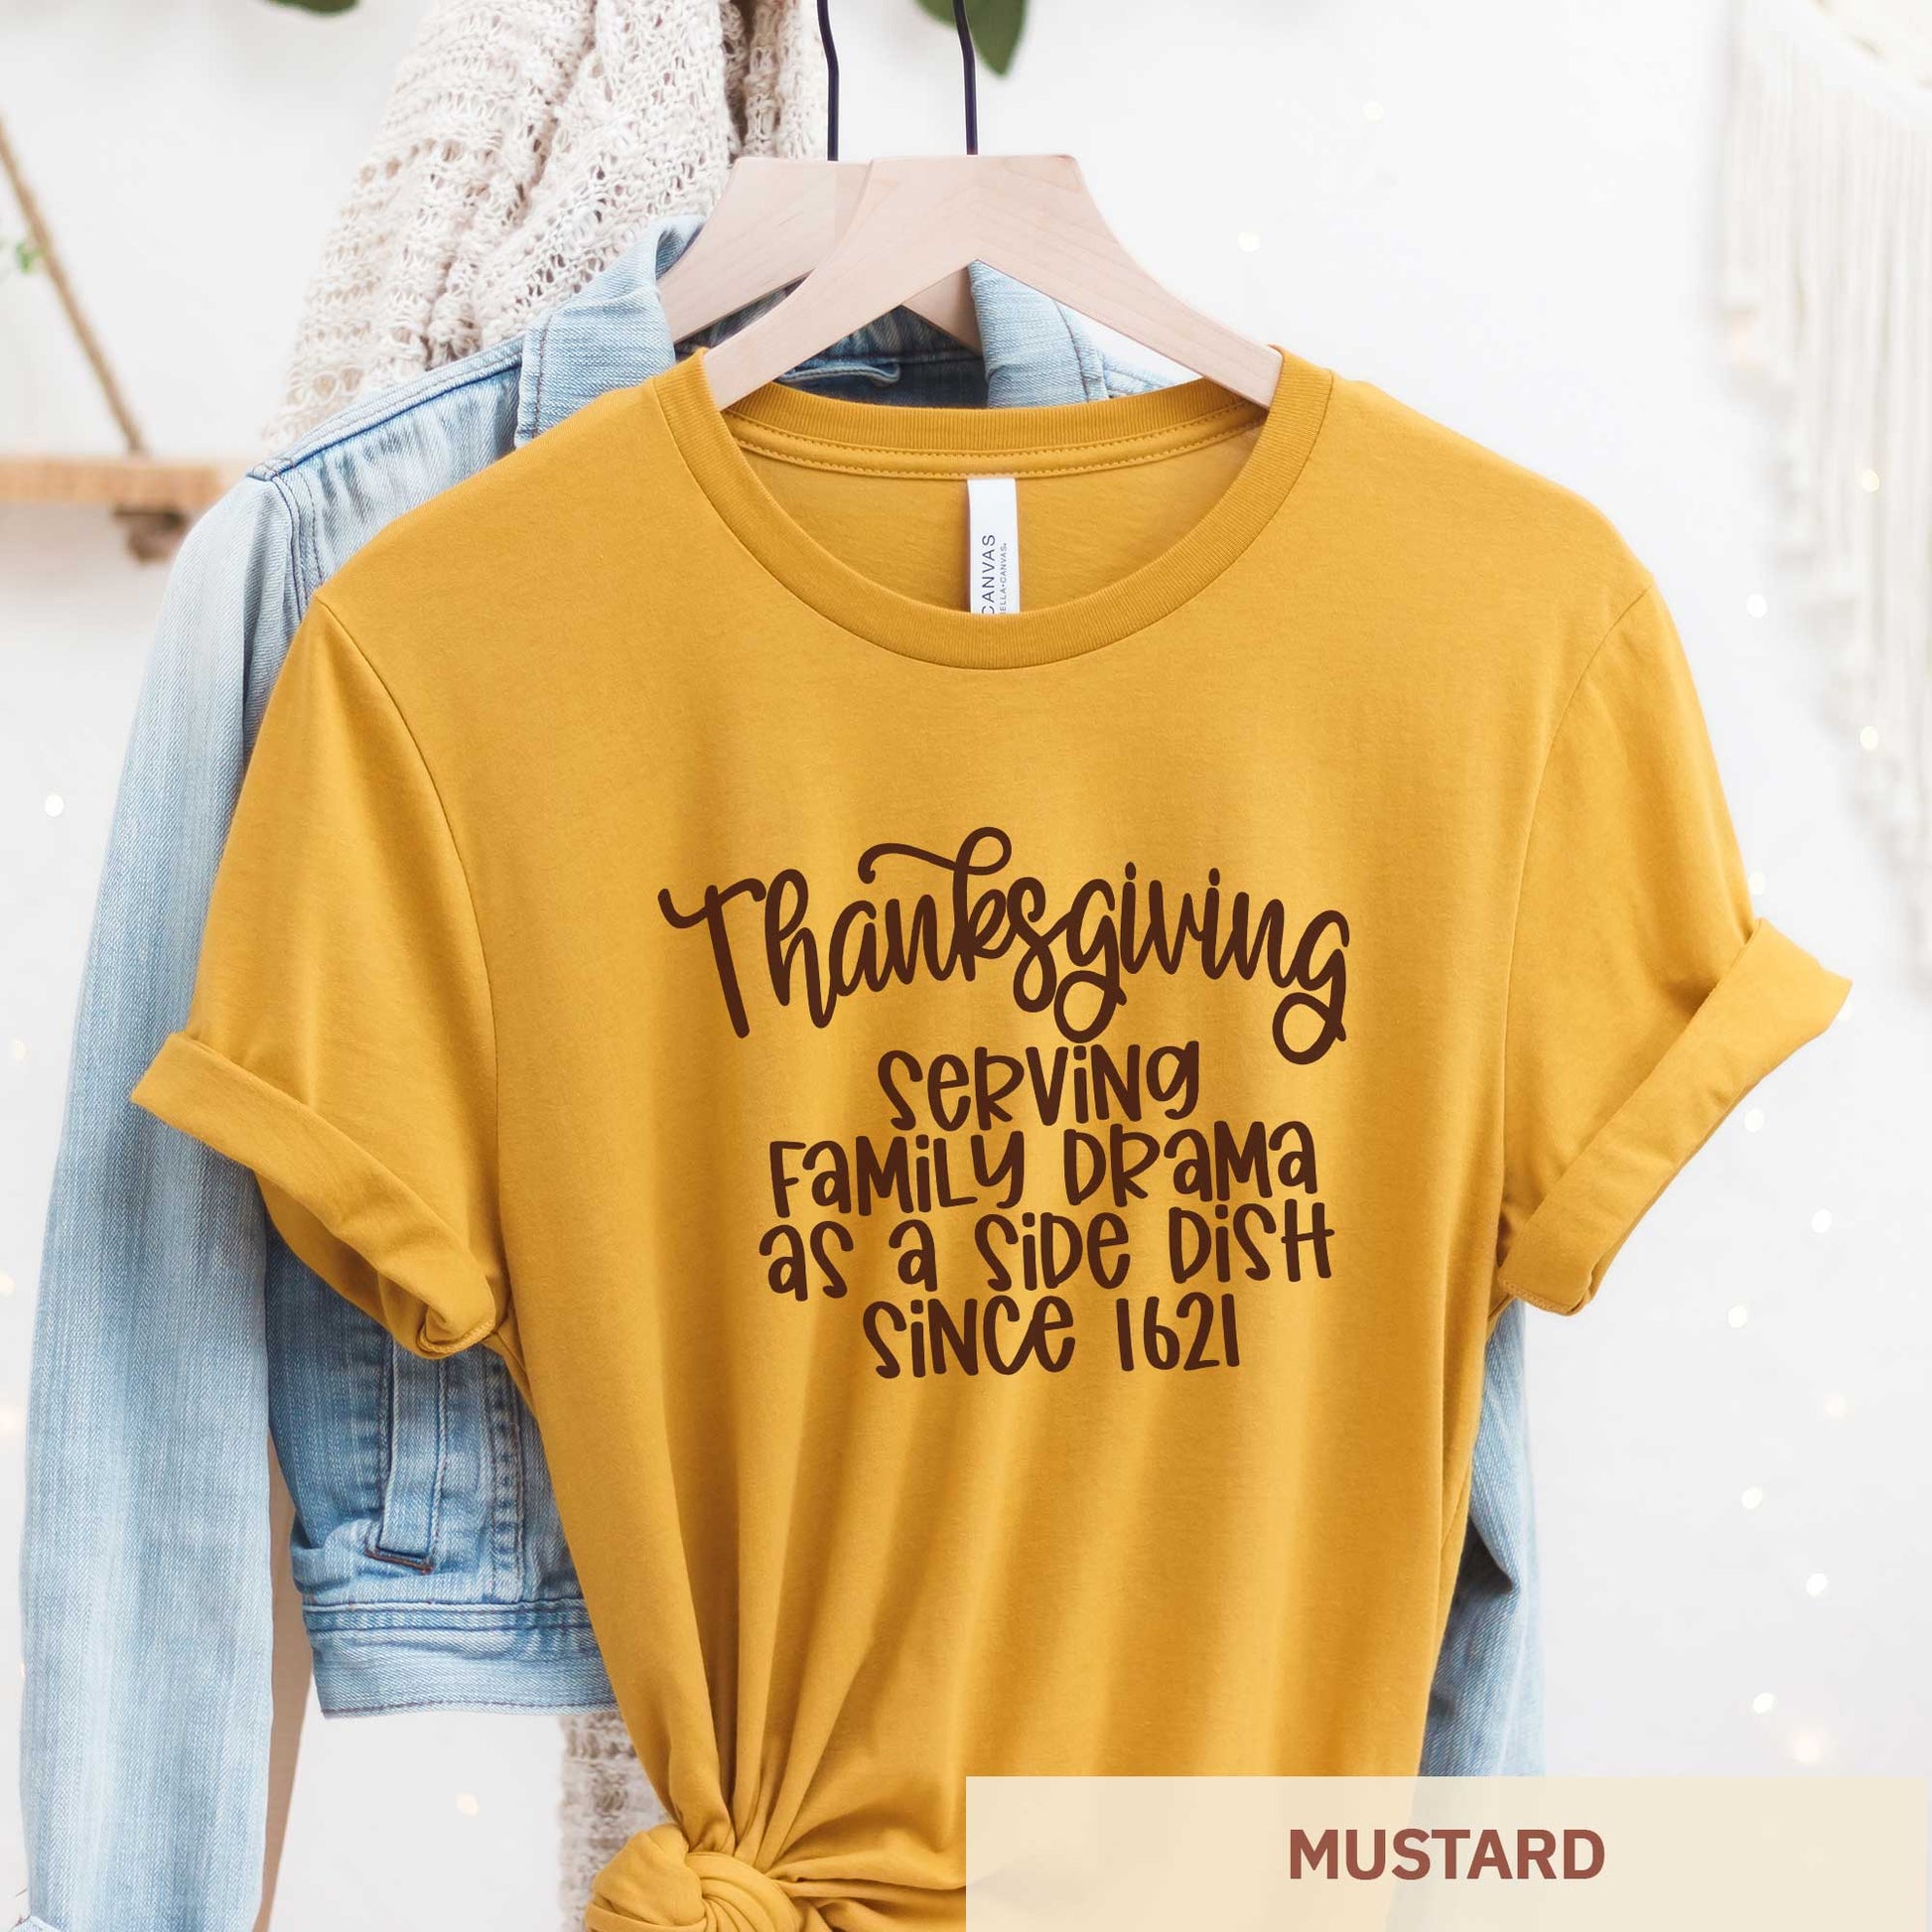 A hanging mustard yellow Bella Canvas t-shirt featuring the words thanksgiving serving family as a side dish since 1621.